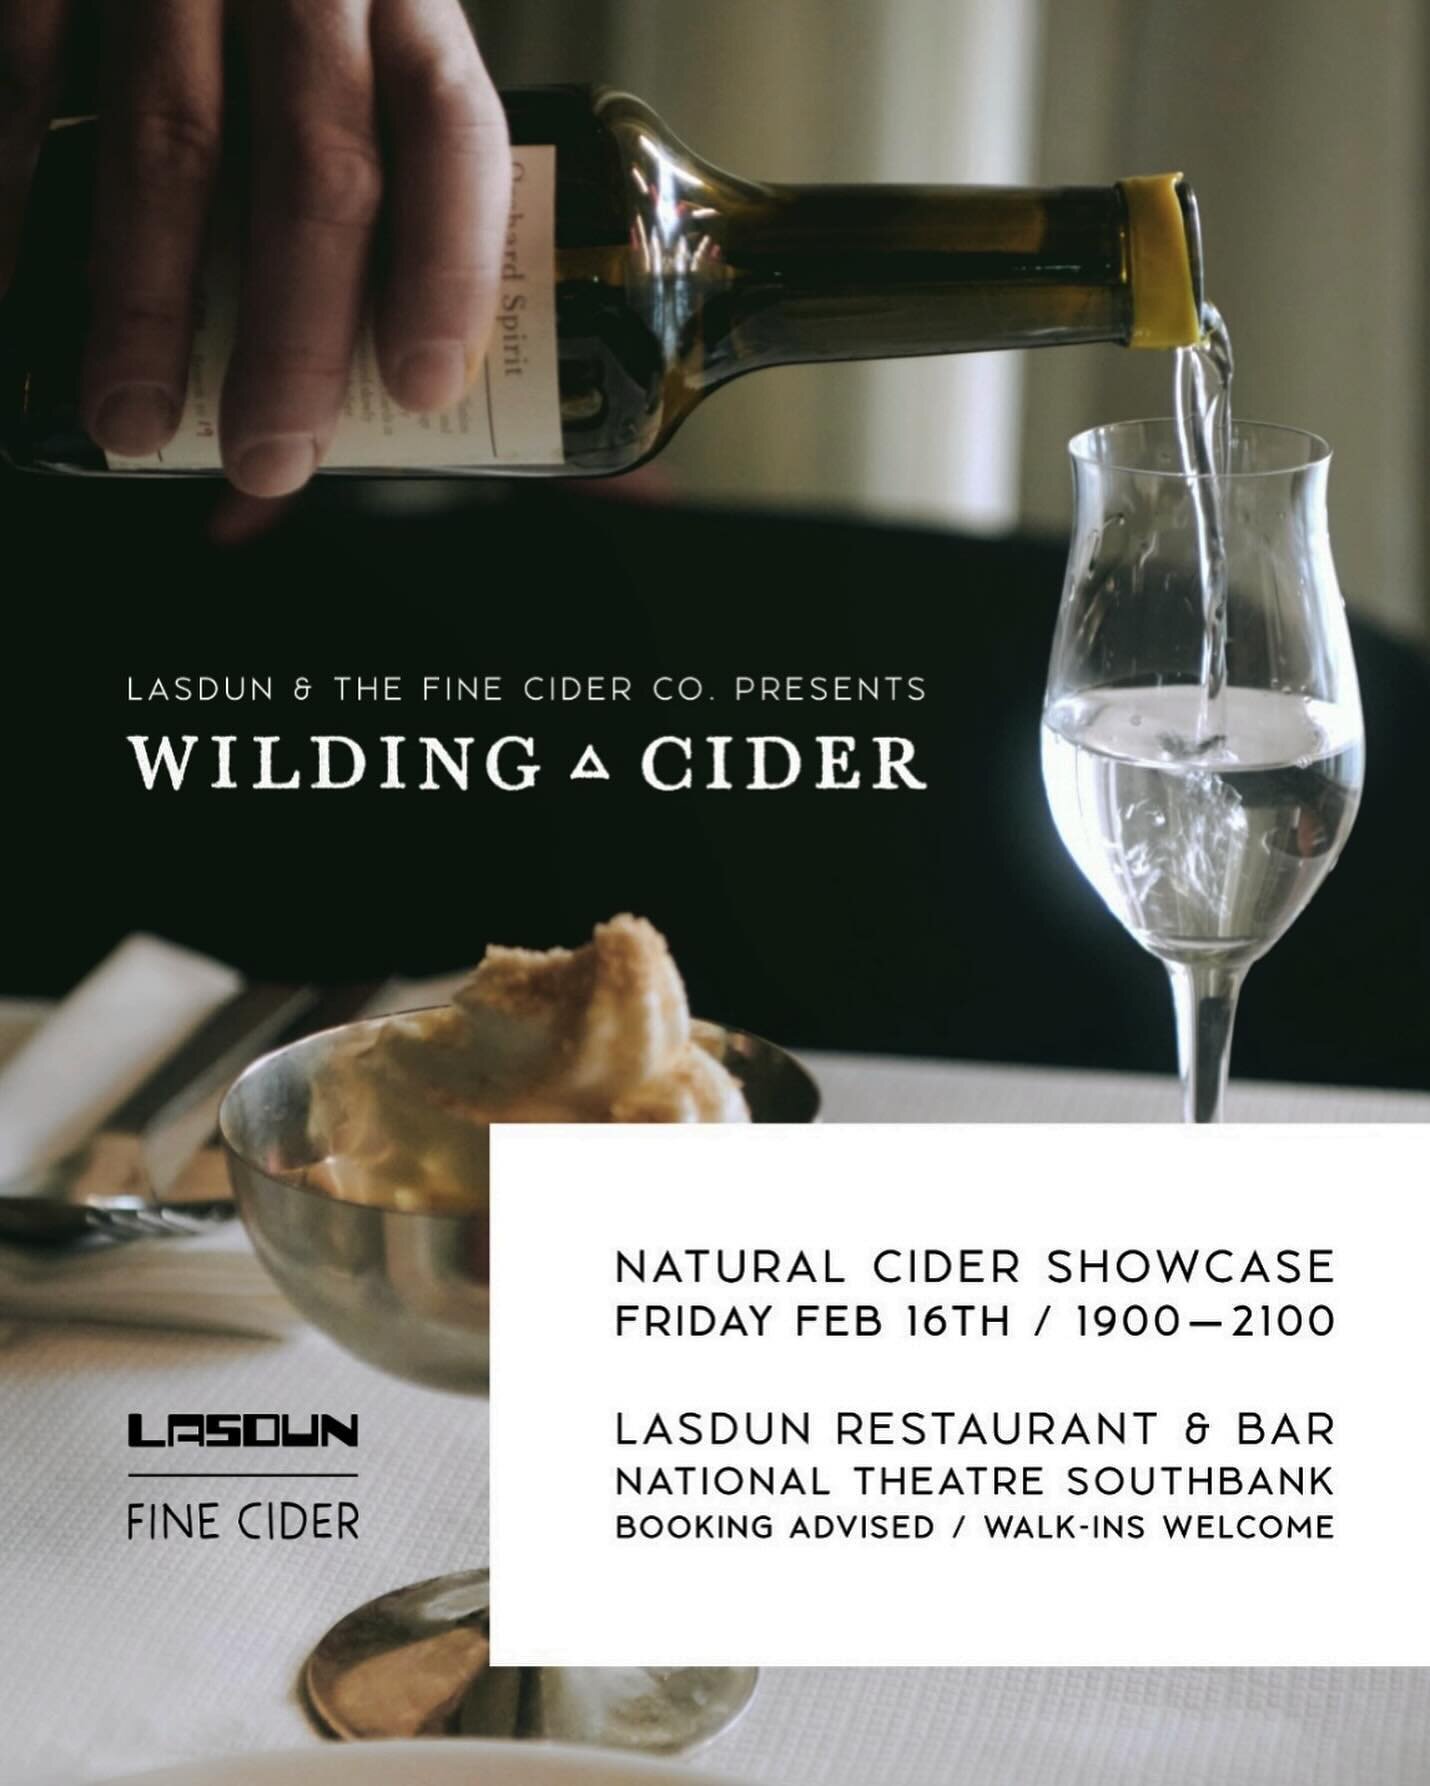 A la carte menu of seasonal dishes from The Marksman / Lasdun catalogue.
Newly released vintage perry, cider, eau d'vie and other treats from the Wilding cellar.
Cider maker Sam in attendance.
Join us for dinner and suggested pairings, or snacks and 